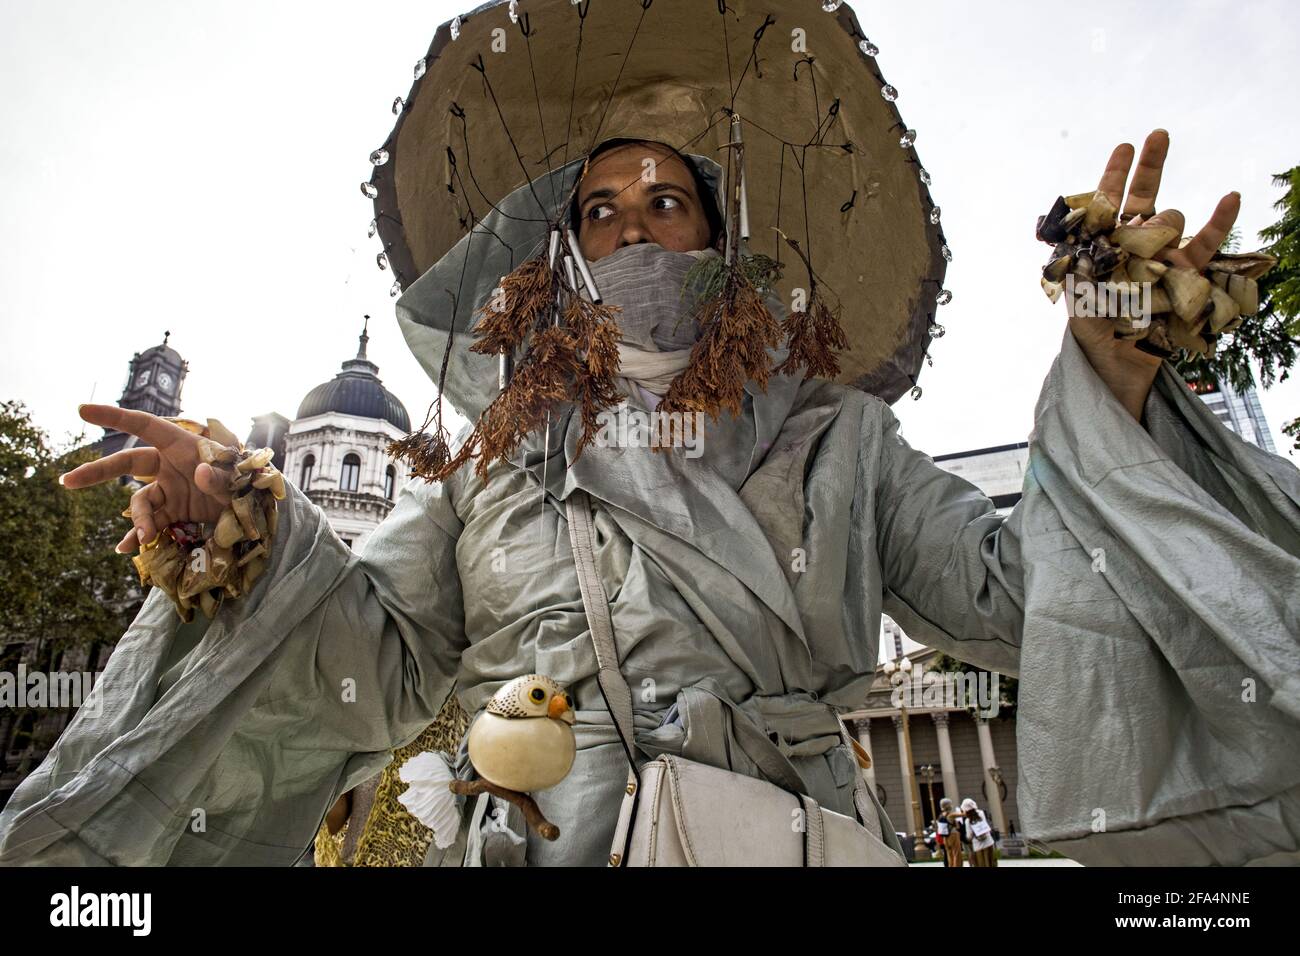 Buenos Aires, Federal Capital, Argentina. 22nd Apr, 2021. A mobilization took place in the city of Buenos Aires, in the vicinity of the government house, in celebration of the International Mother Earth Day, calling to reflect on our commitment to care for the planet. Credit: Roberto Almeida Aveledo/ZUMA Wire/Alamy Live News Stock Photo